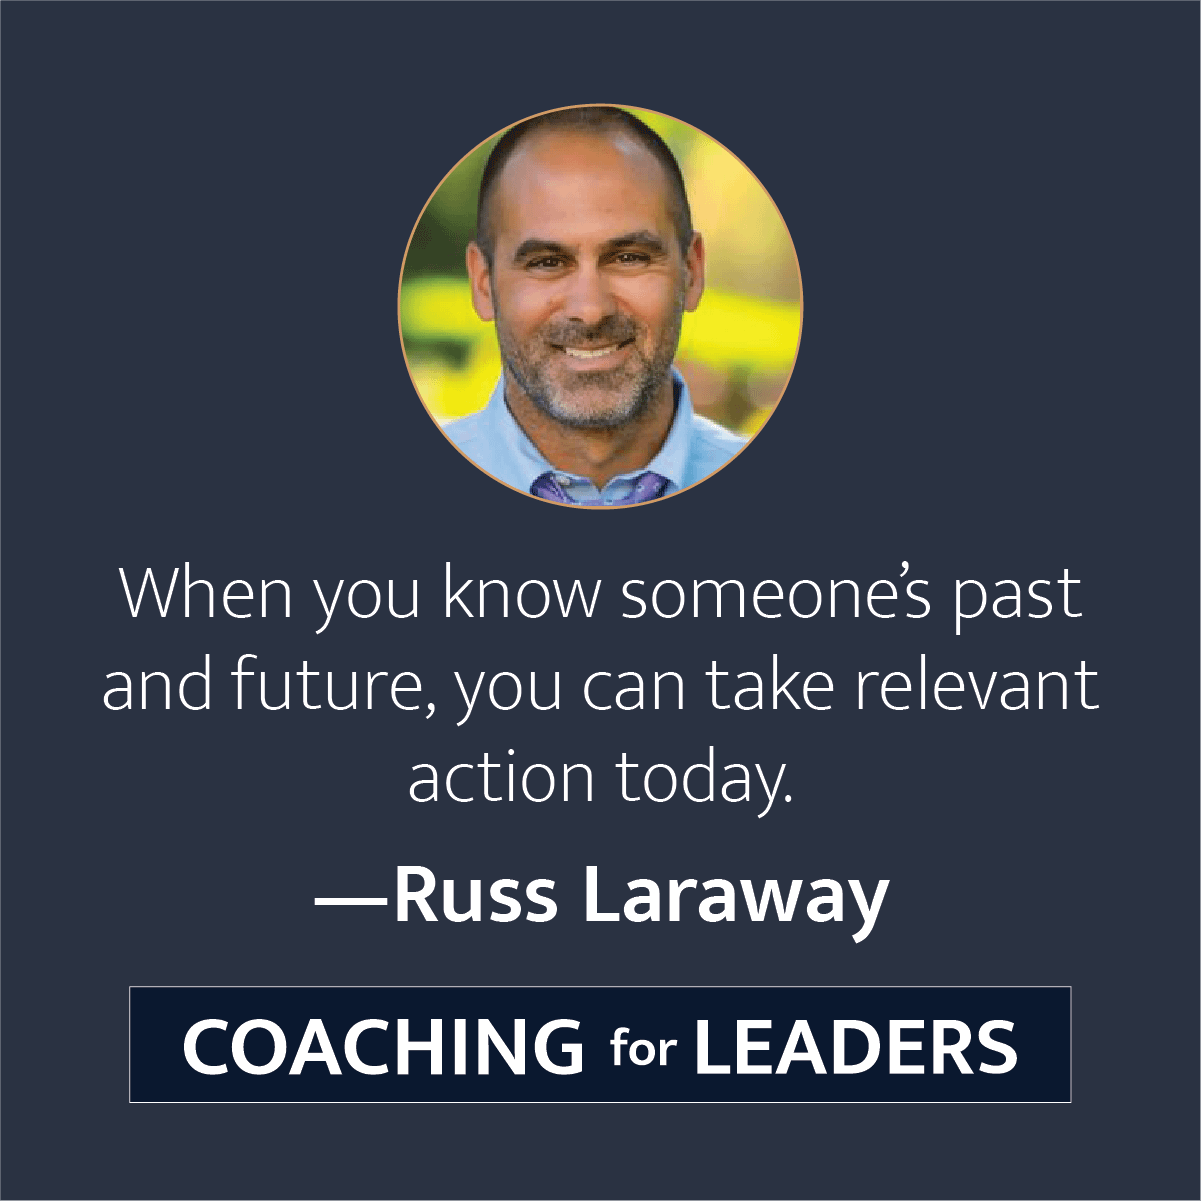 When you know someone's past and future, you can take relevant action today.